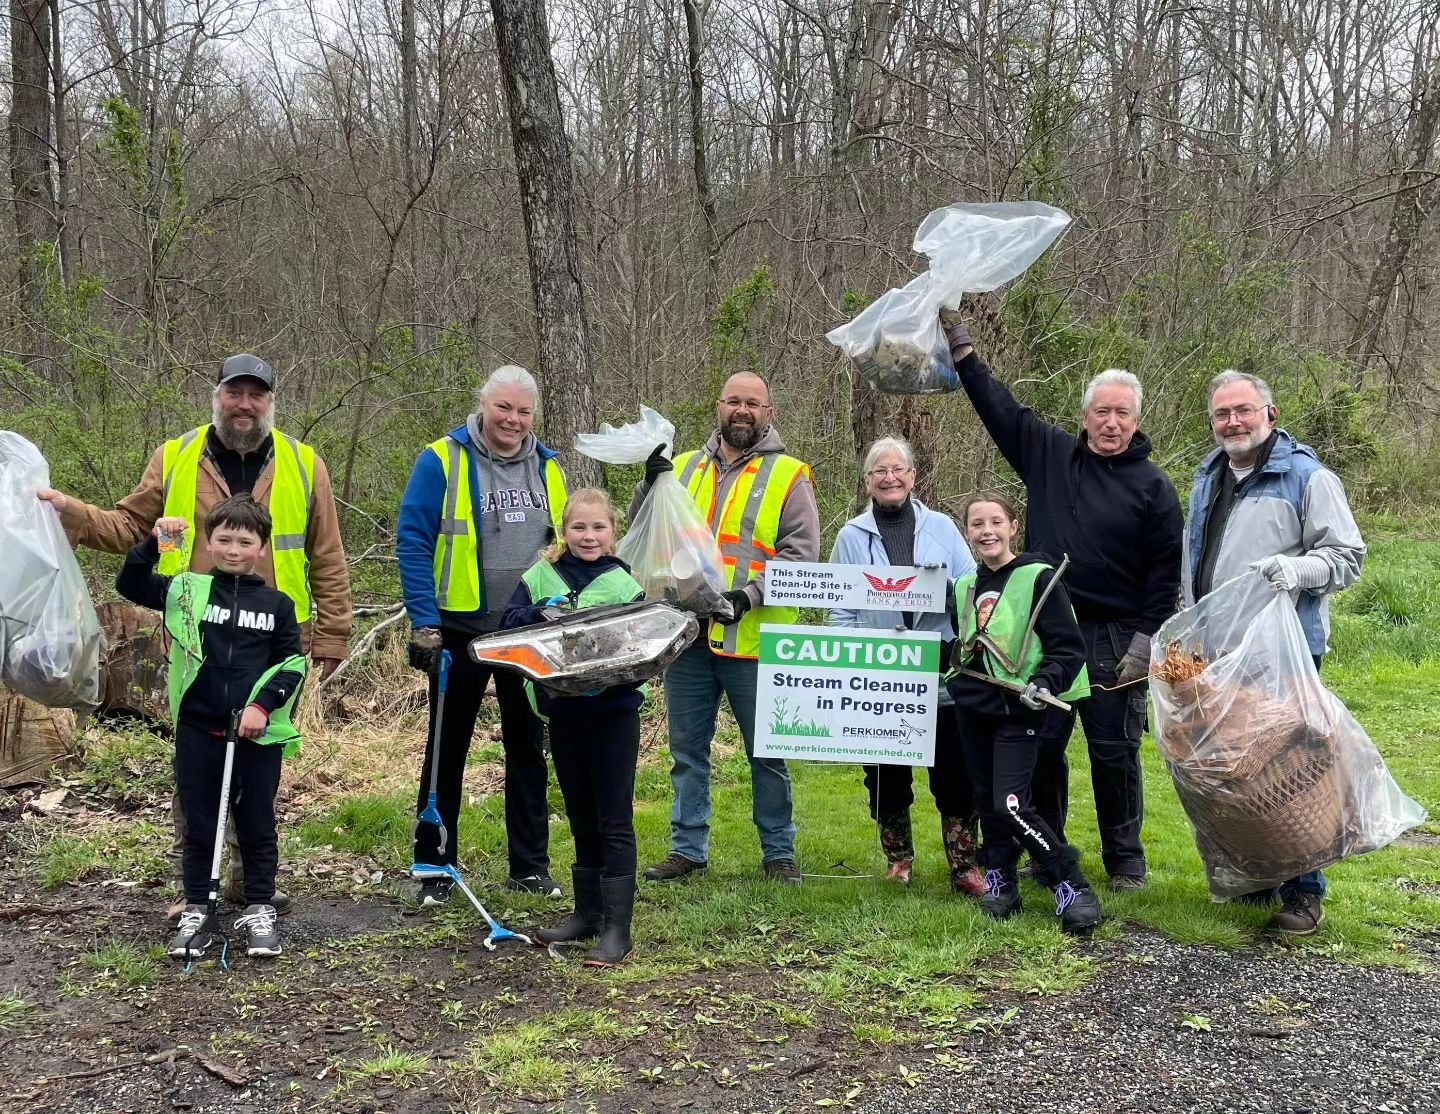 Thank you to our volunteers, sponsors, and partners for making the 20th Anniversary of the Perkiomen Stream Clean-up a HUGE success!! We can't wait to share 2024 Stream Clean-up statistics with you all once the numbers are fully in! Check out our web